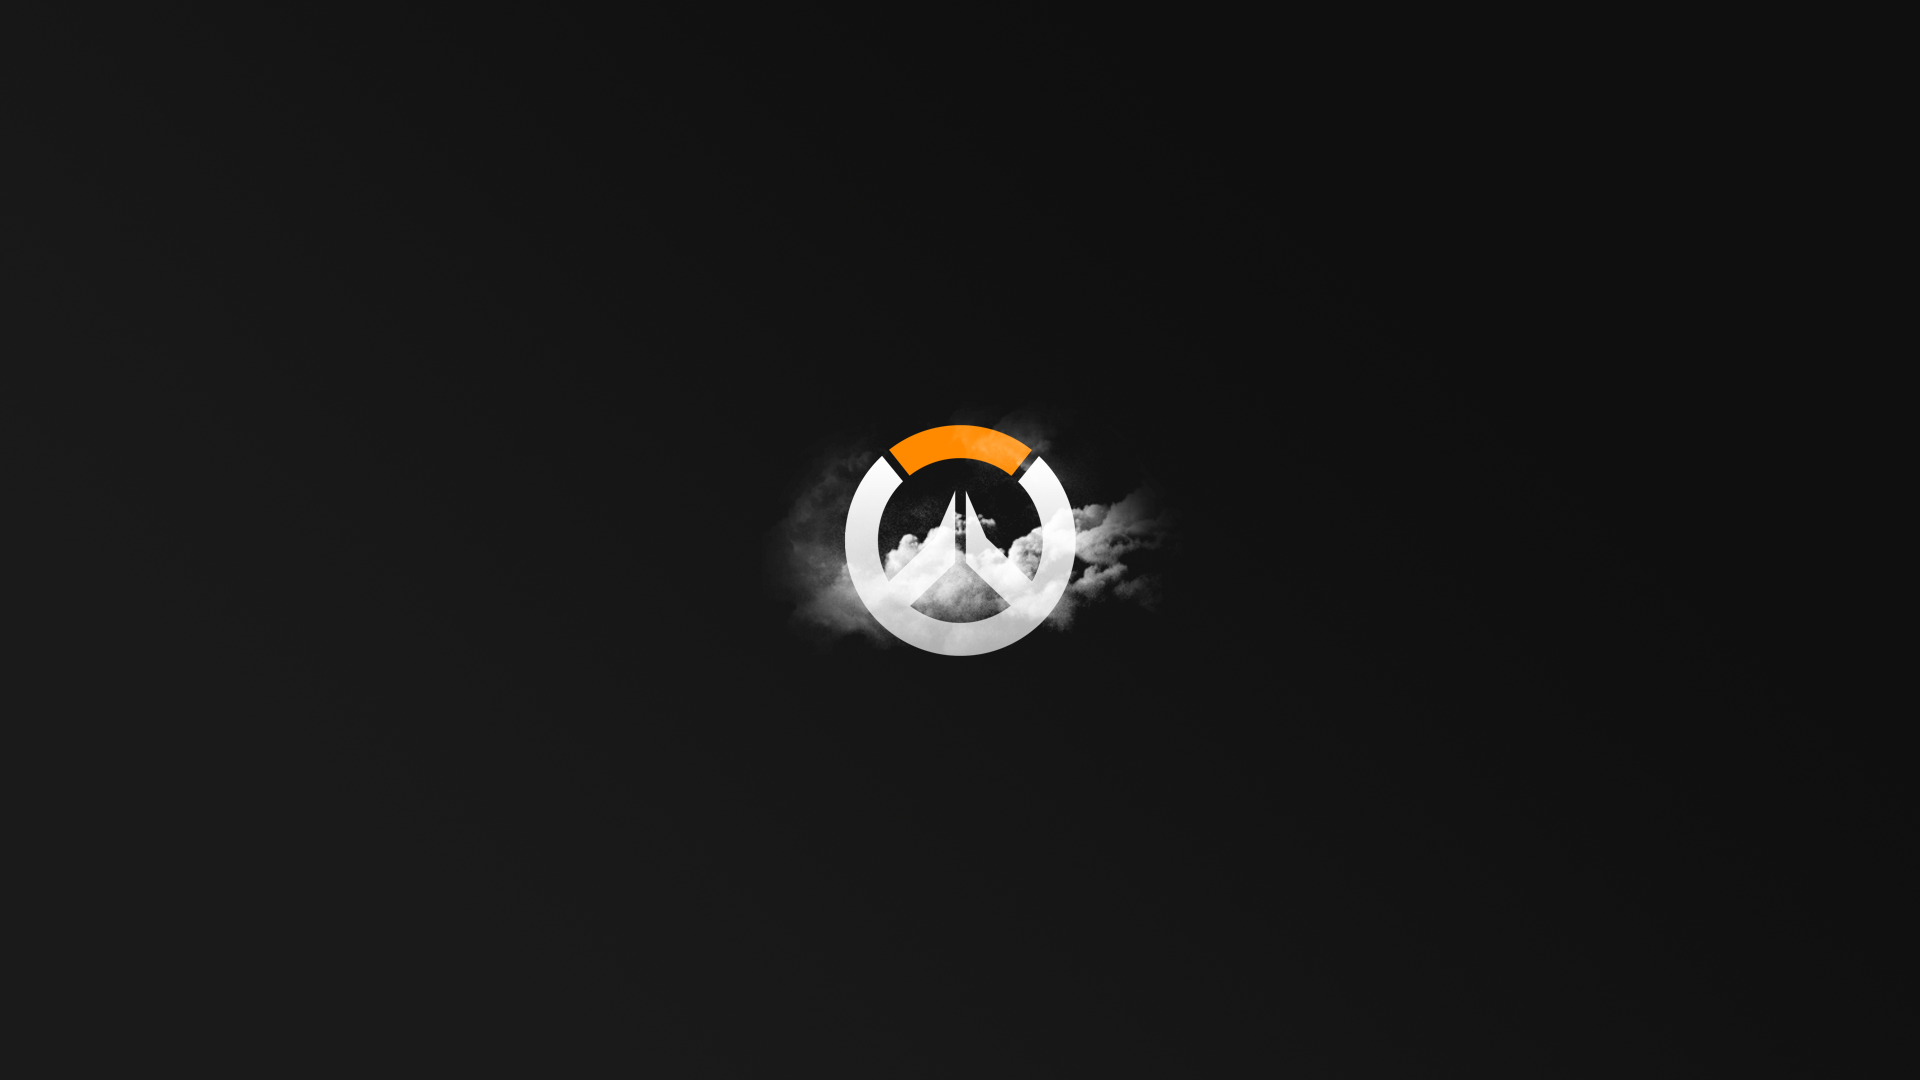 General 1920x1080 logo gray background video games Overwatch PC gaming simple background minimalism